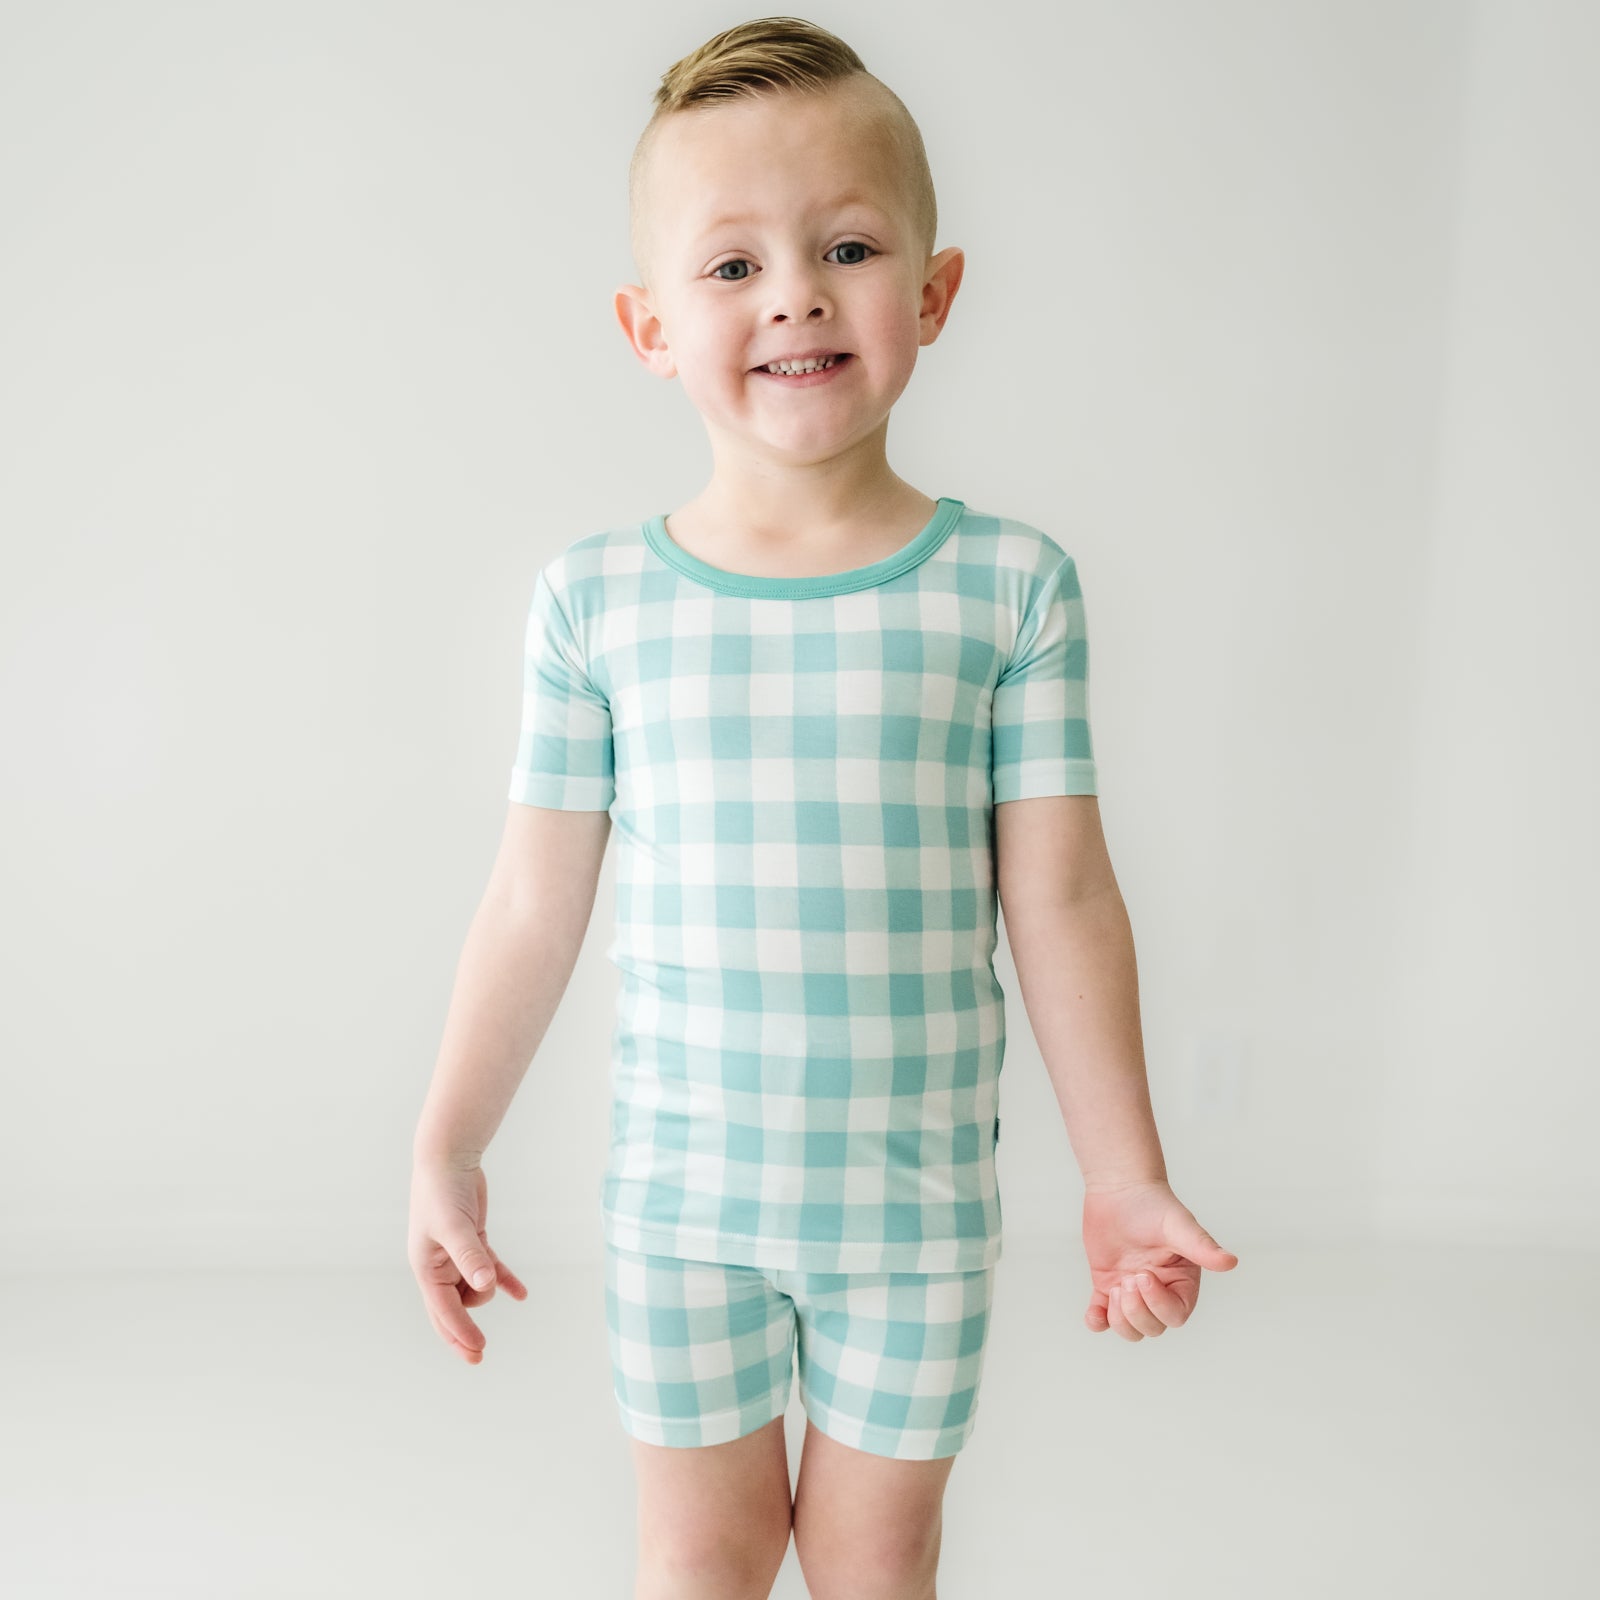 Alternate image of a child posing wearing a Aqua Gingham two piece short sleeve and shorts pajama set